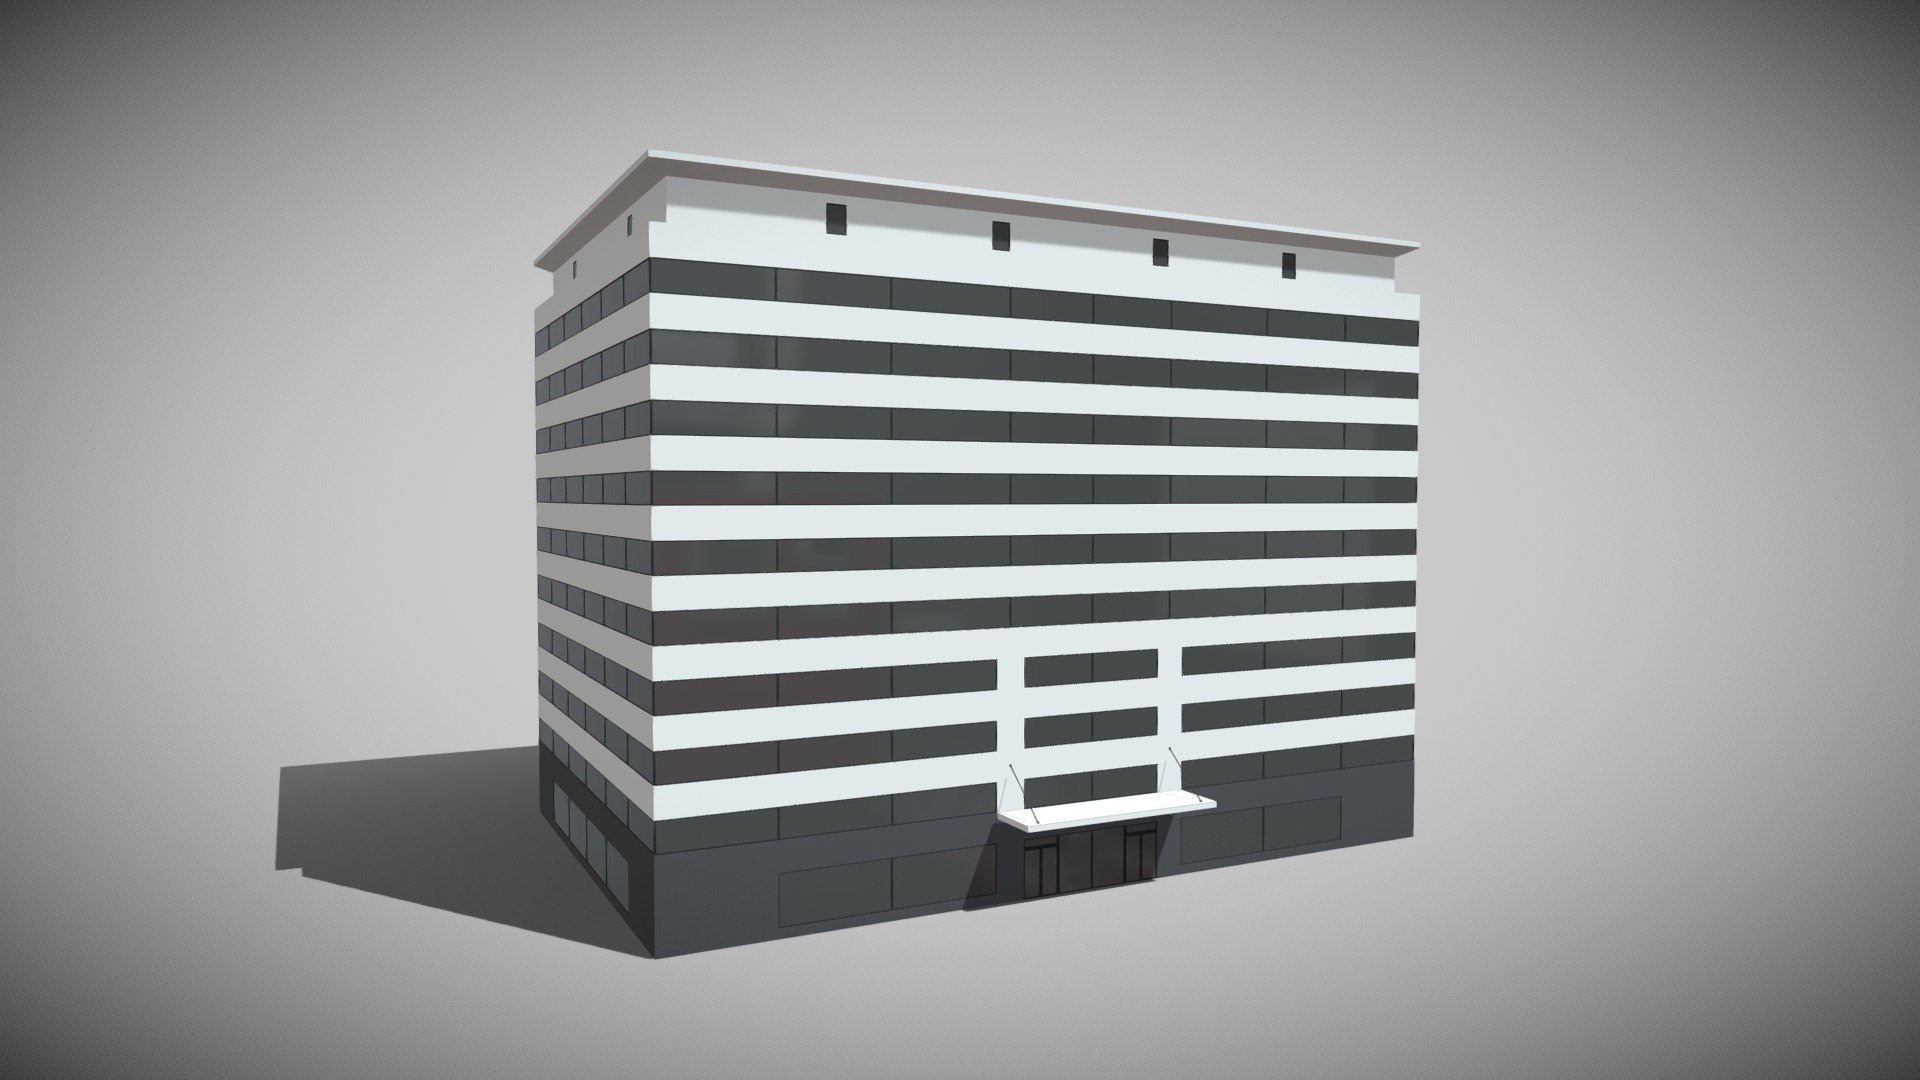 Detailed model of a Commercial Building with no interior, modeled in Cinema 4D.The model was created using approximate real world dimensions.

The model has 5,200 polys and 6,789 vertices.

An additional file has been provided containing the original Cinema 4D project files and other 3d export files such as 3ds, fbx and obj 3d model